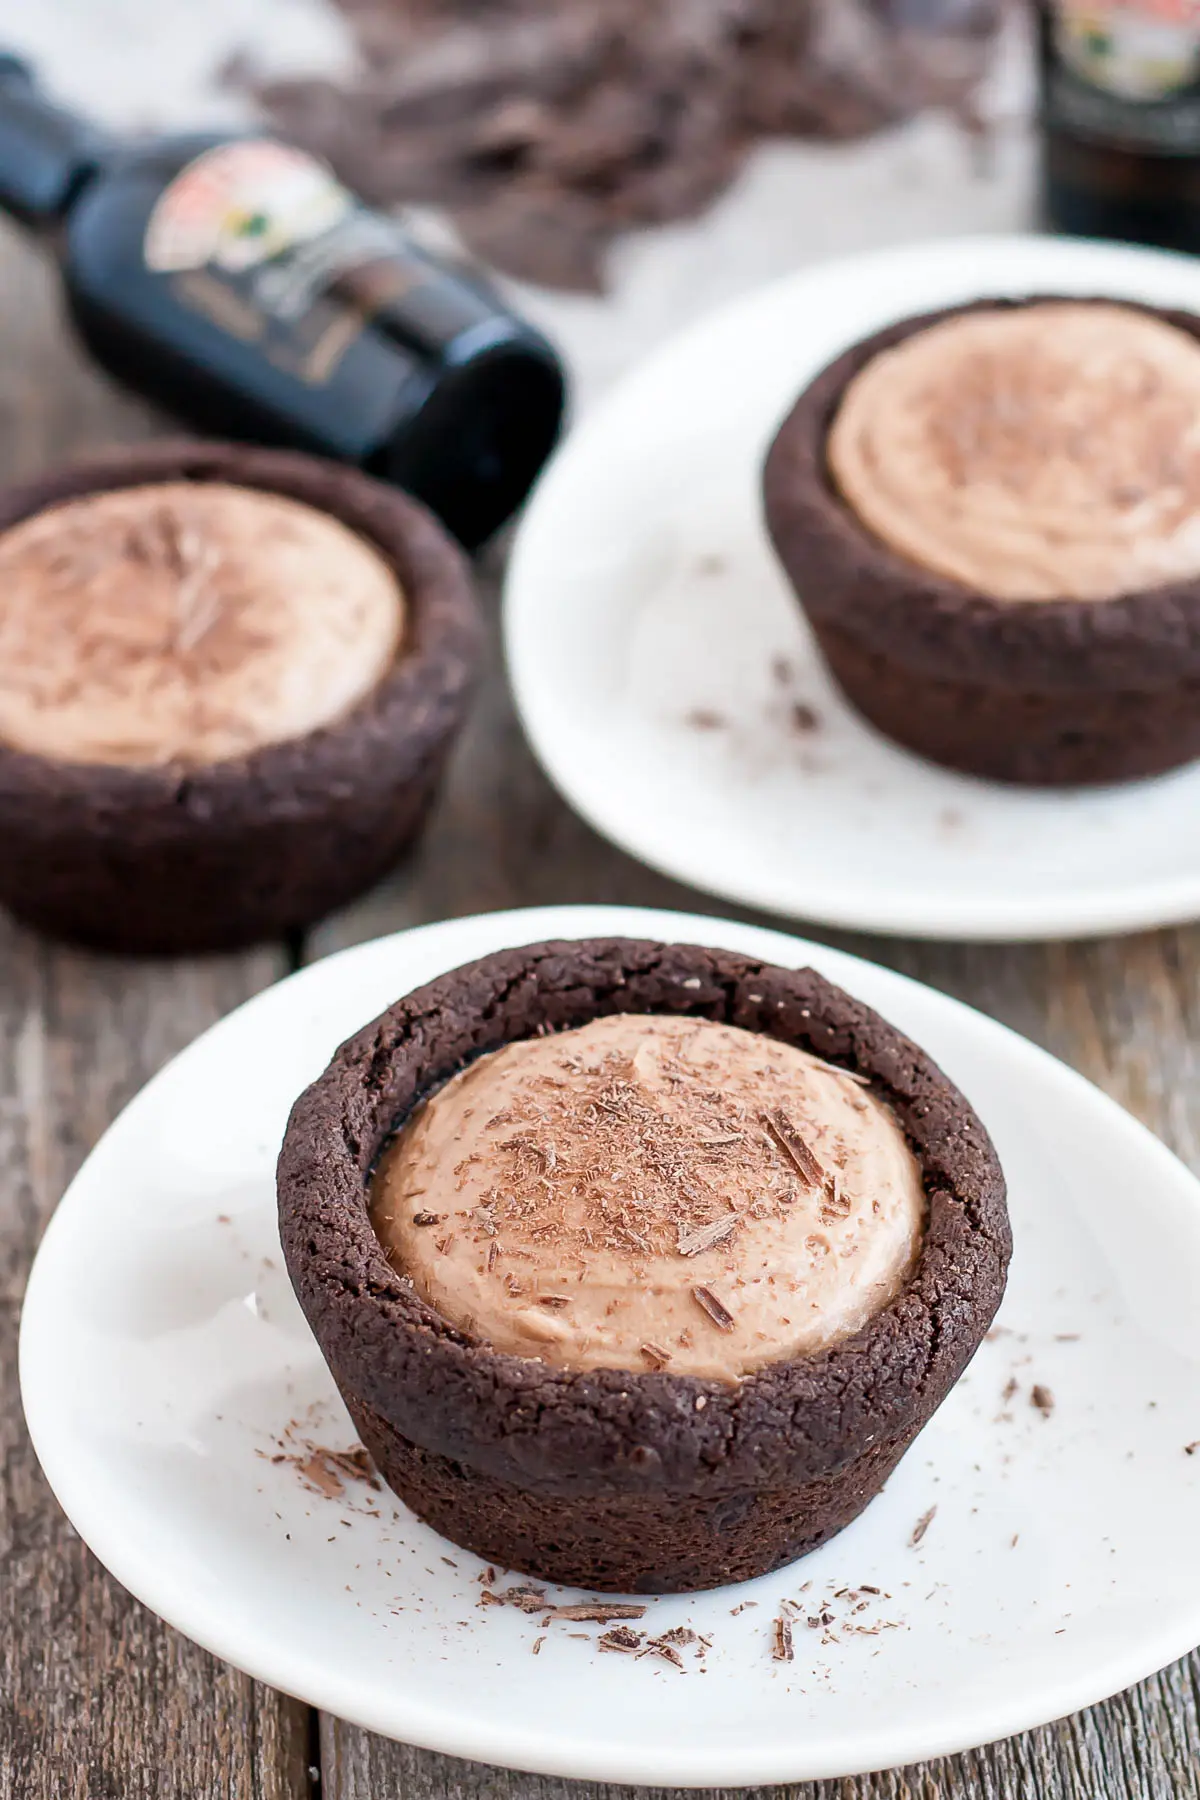 Chocolate Baileys cheesecake paired with rich chocolate cookies